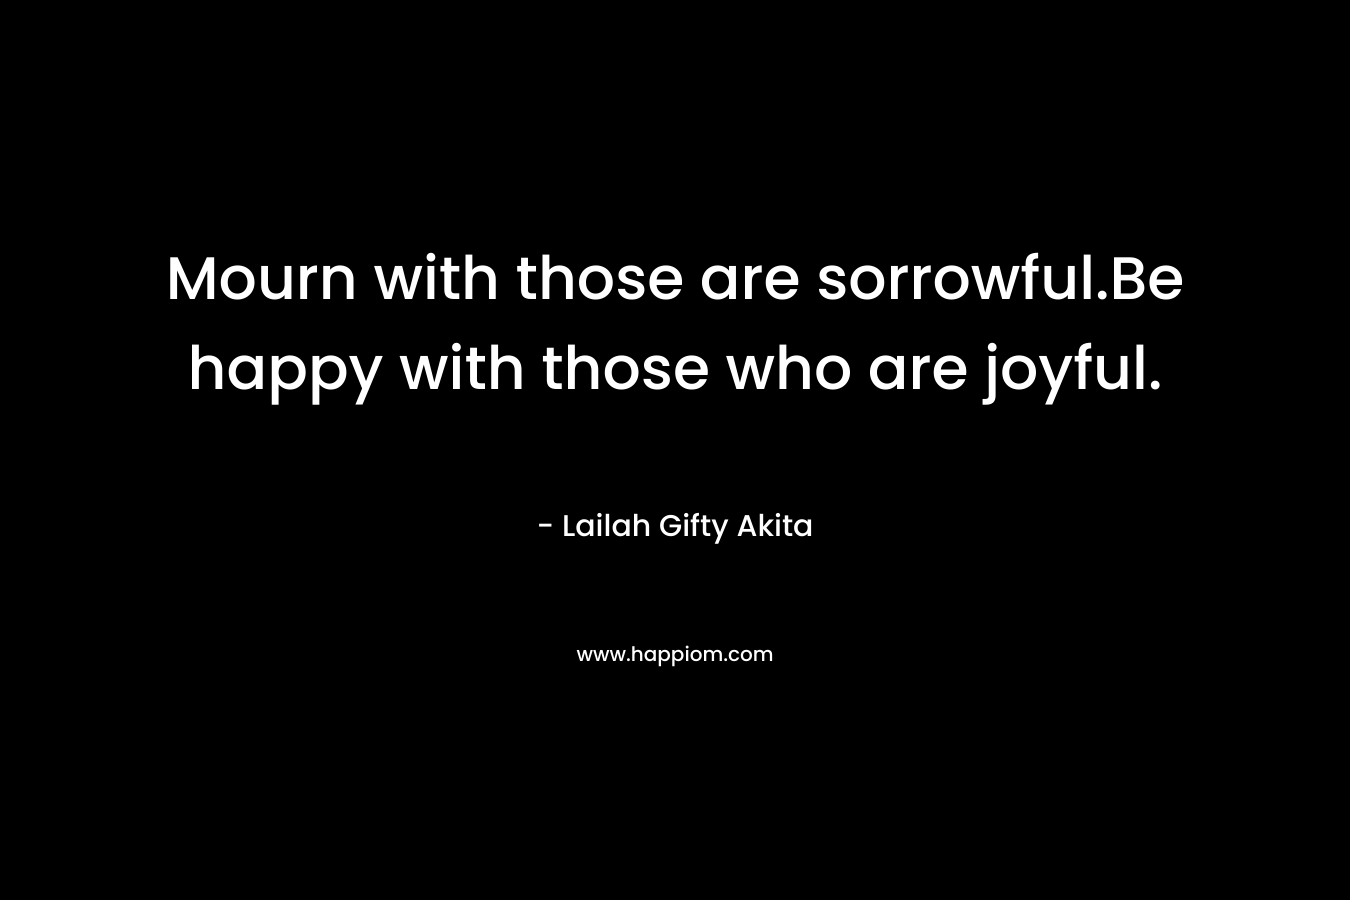 Mourn with those are sorrowful.Be happy with those who are joyful.